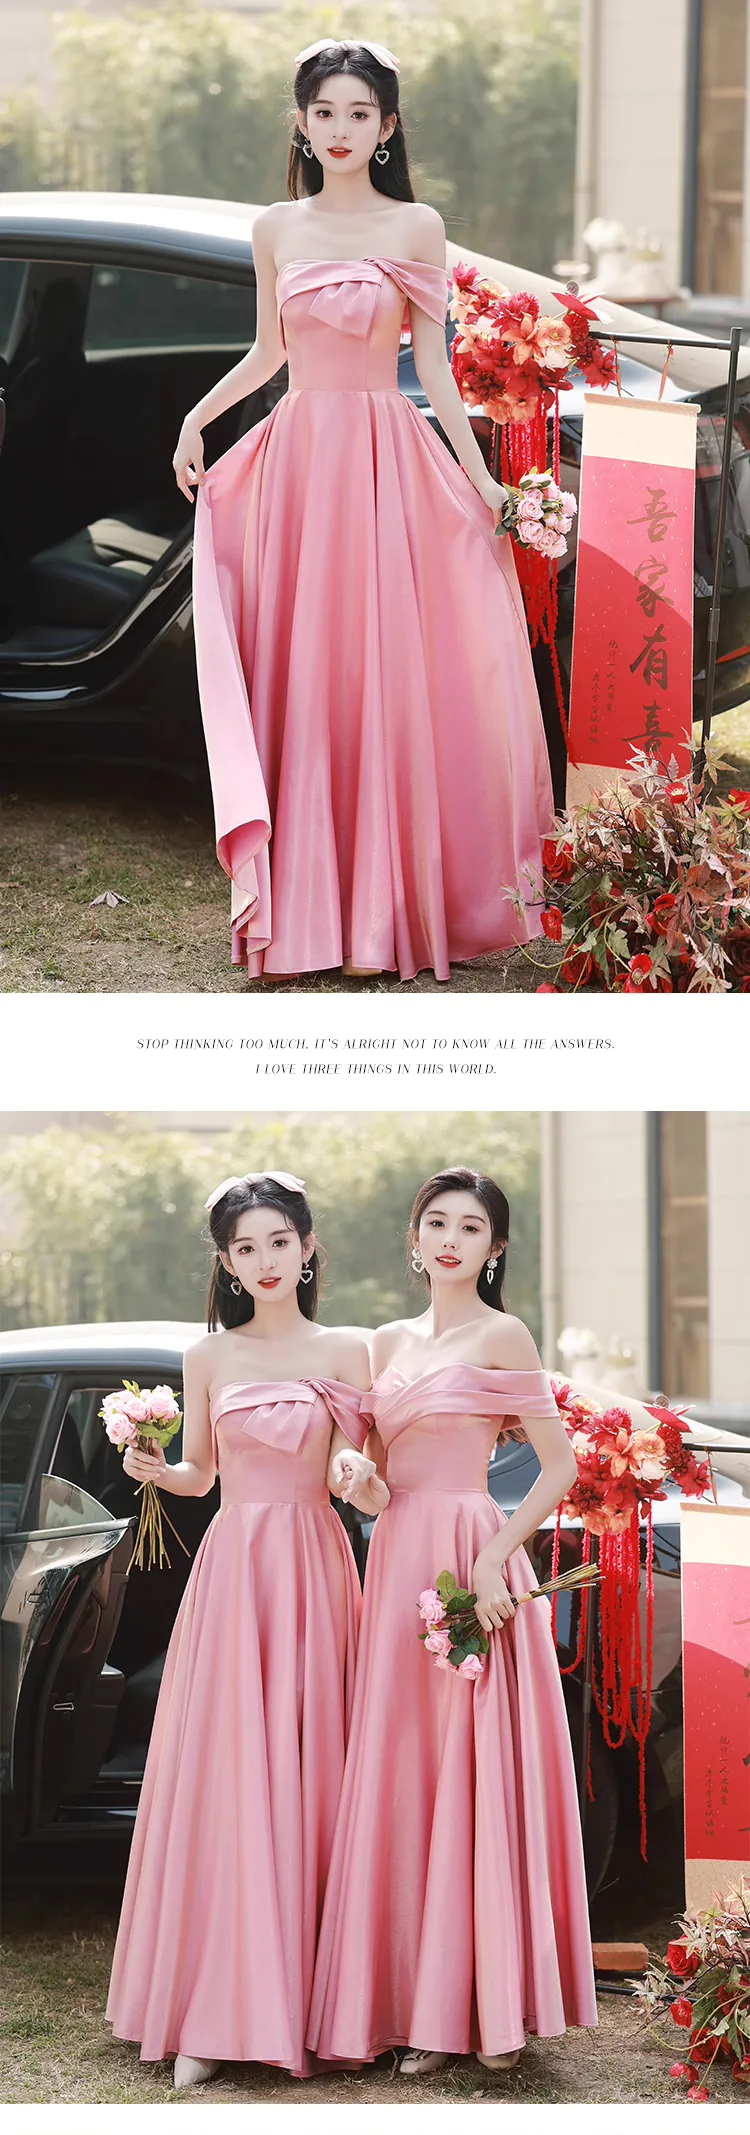 Charming-Pink-Satin-Bridesmaid-Dress-Short-Sleeve-Prom-Evening-Gown23